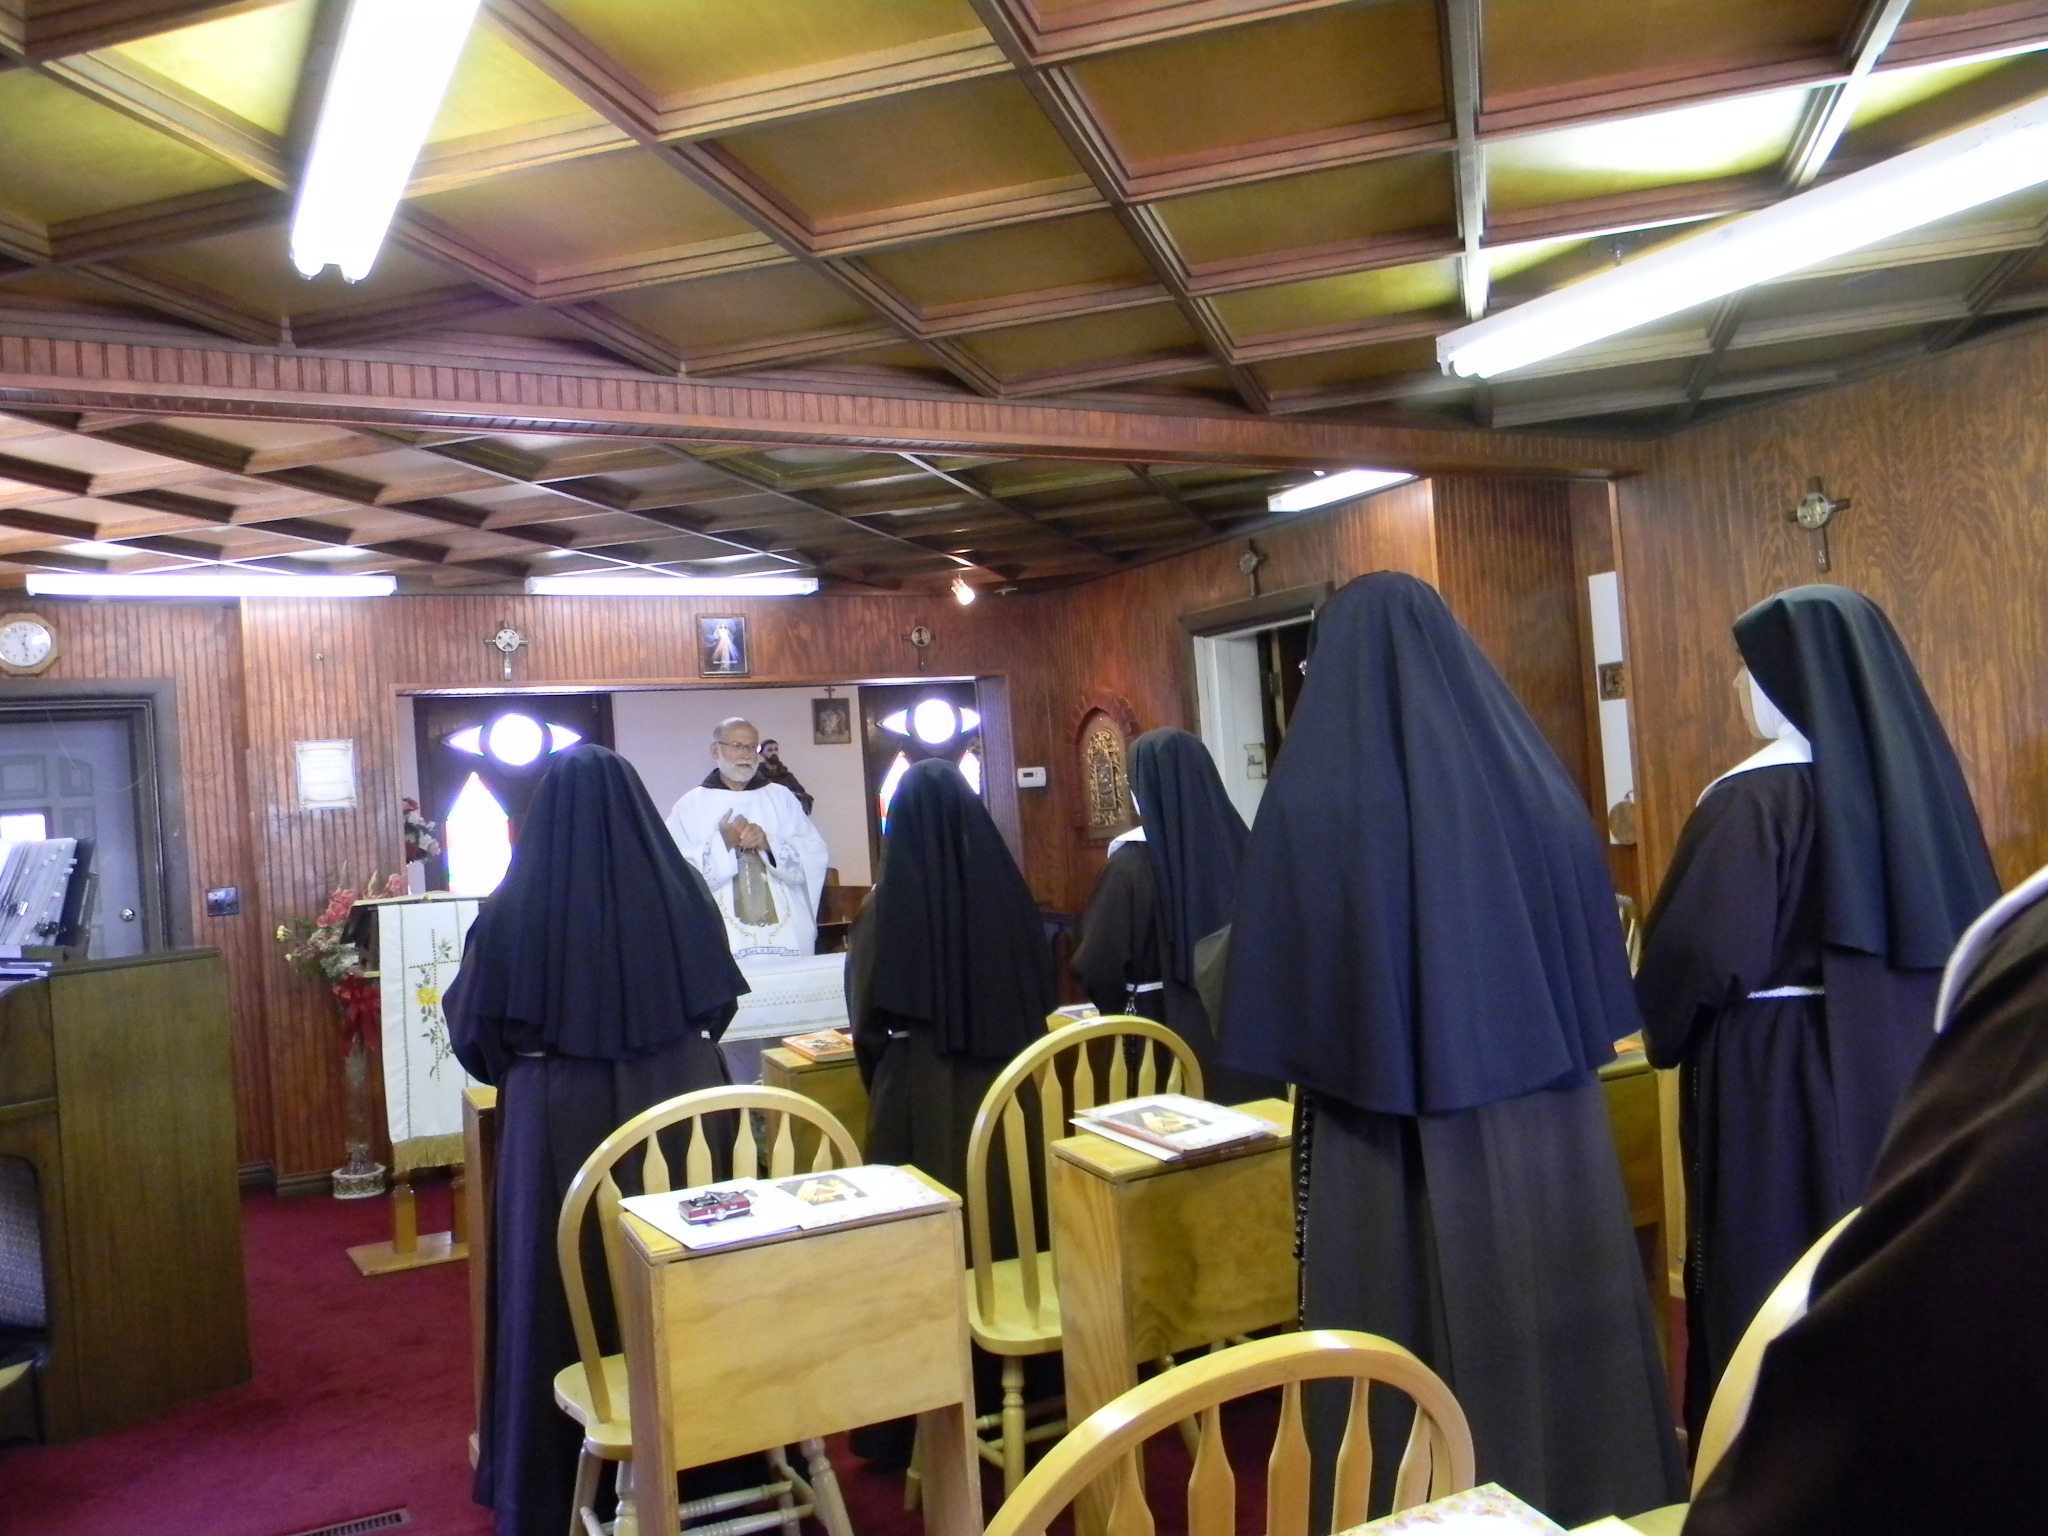 Vocation Monastery Of Amarillo Tx Capuchin Poor Clare Sisters 